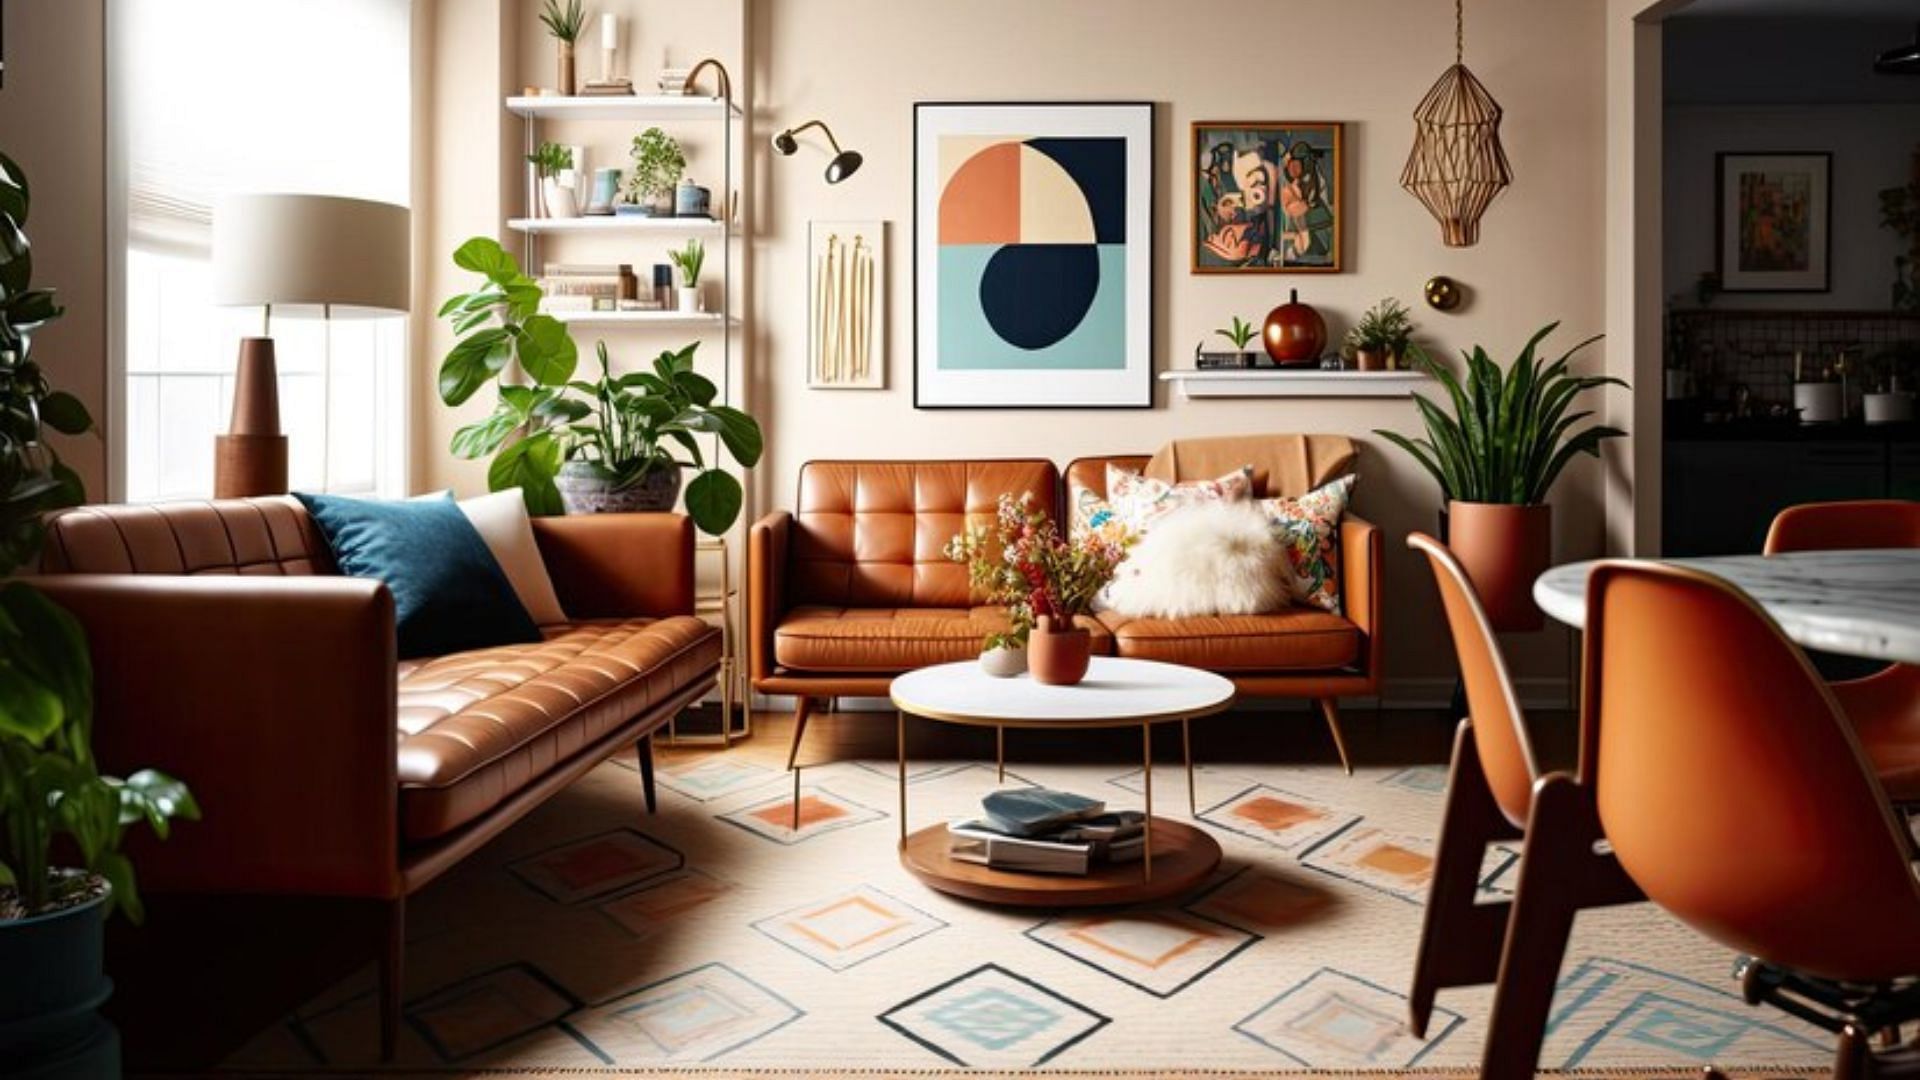 11 Tips from the designers to revamp